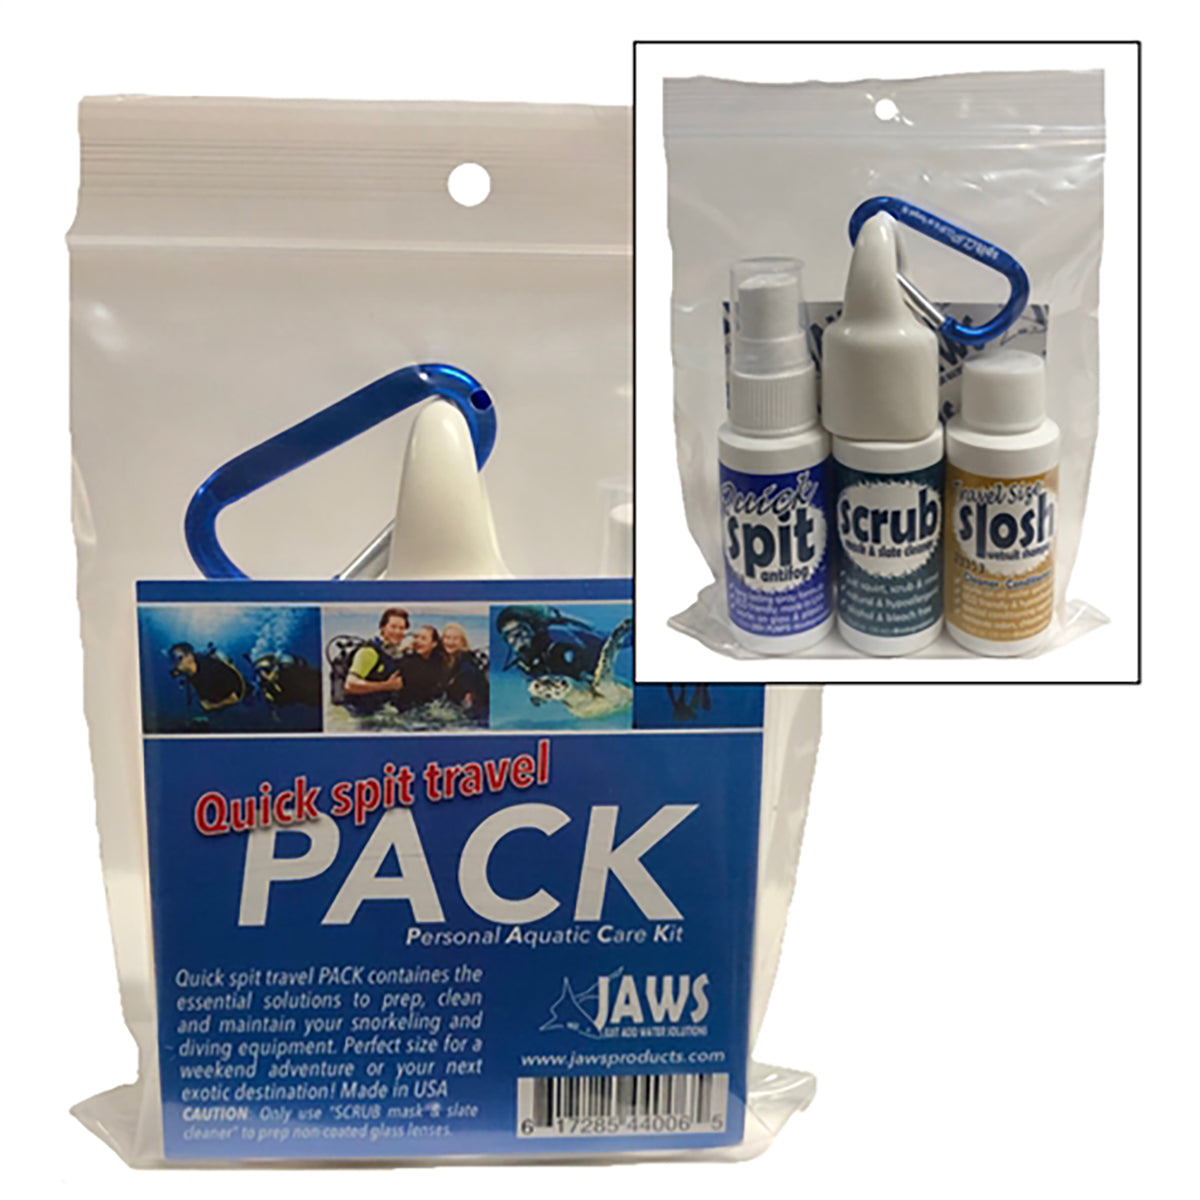 JAWS Spit Travel Pack for Water Sports and Gear JAWS